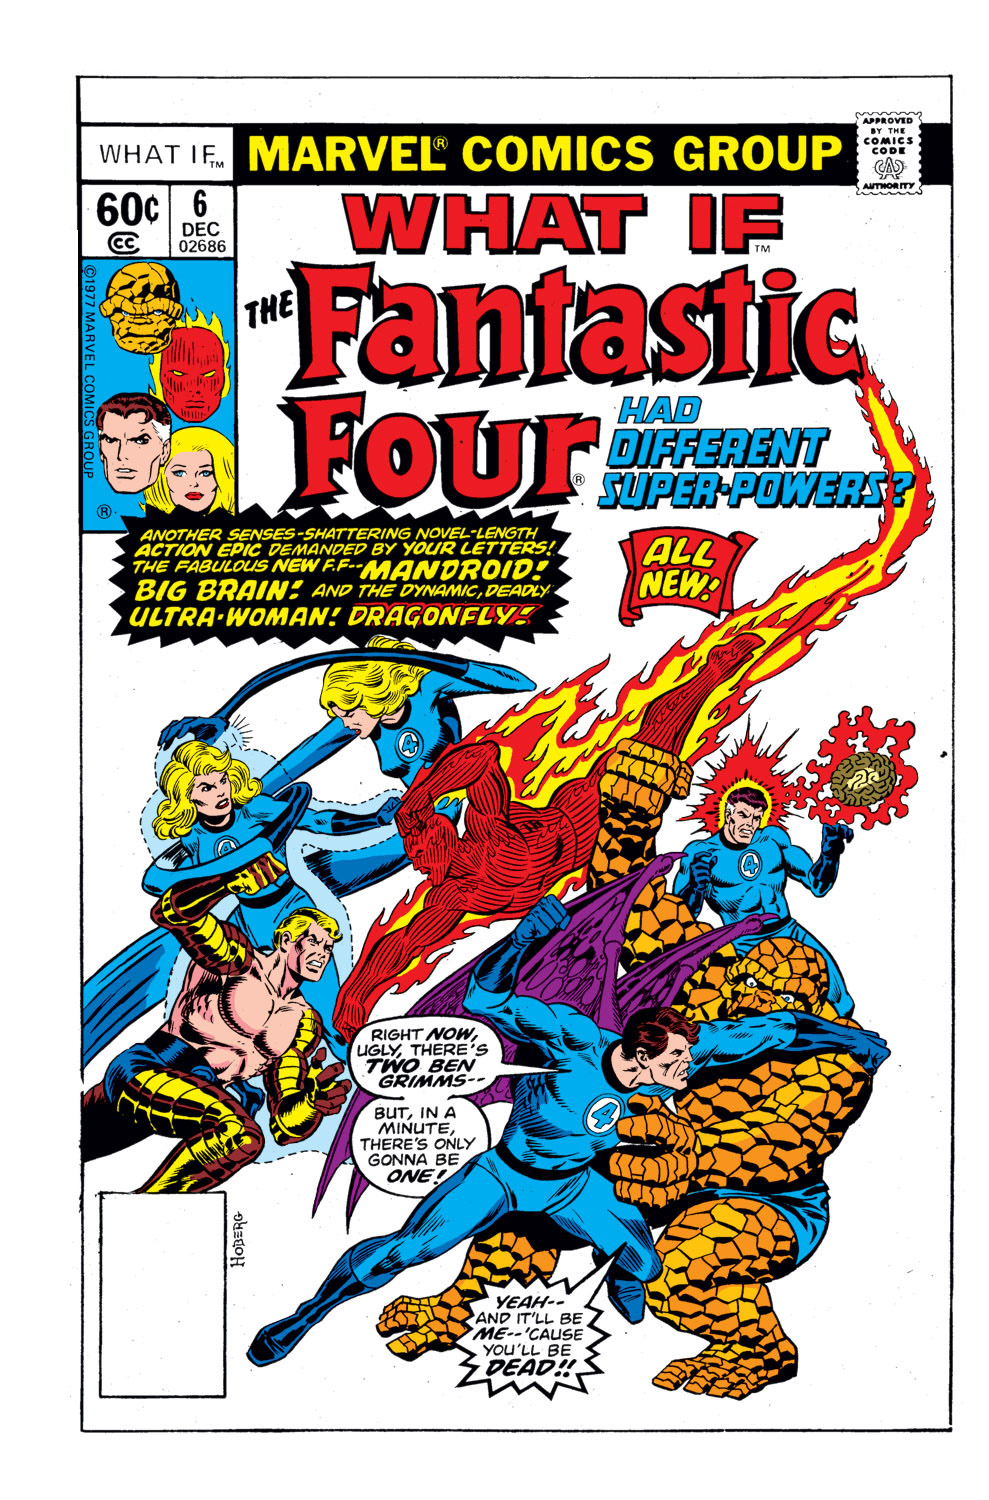 What If? (1977) issue 6 - The Fantastic Four had different superpowers - Page 1